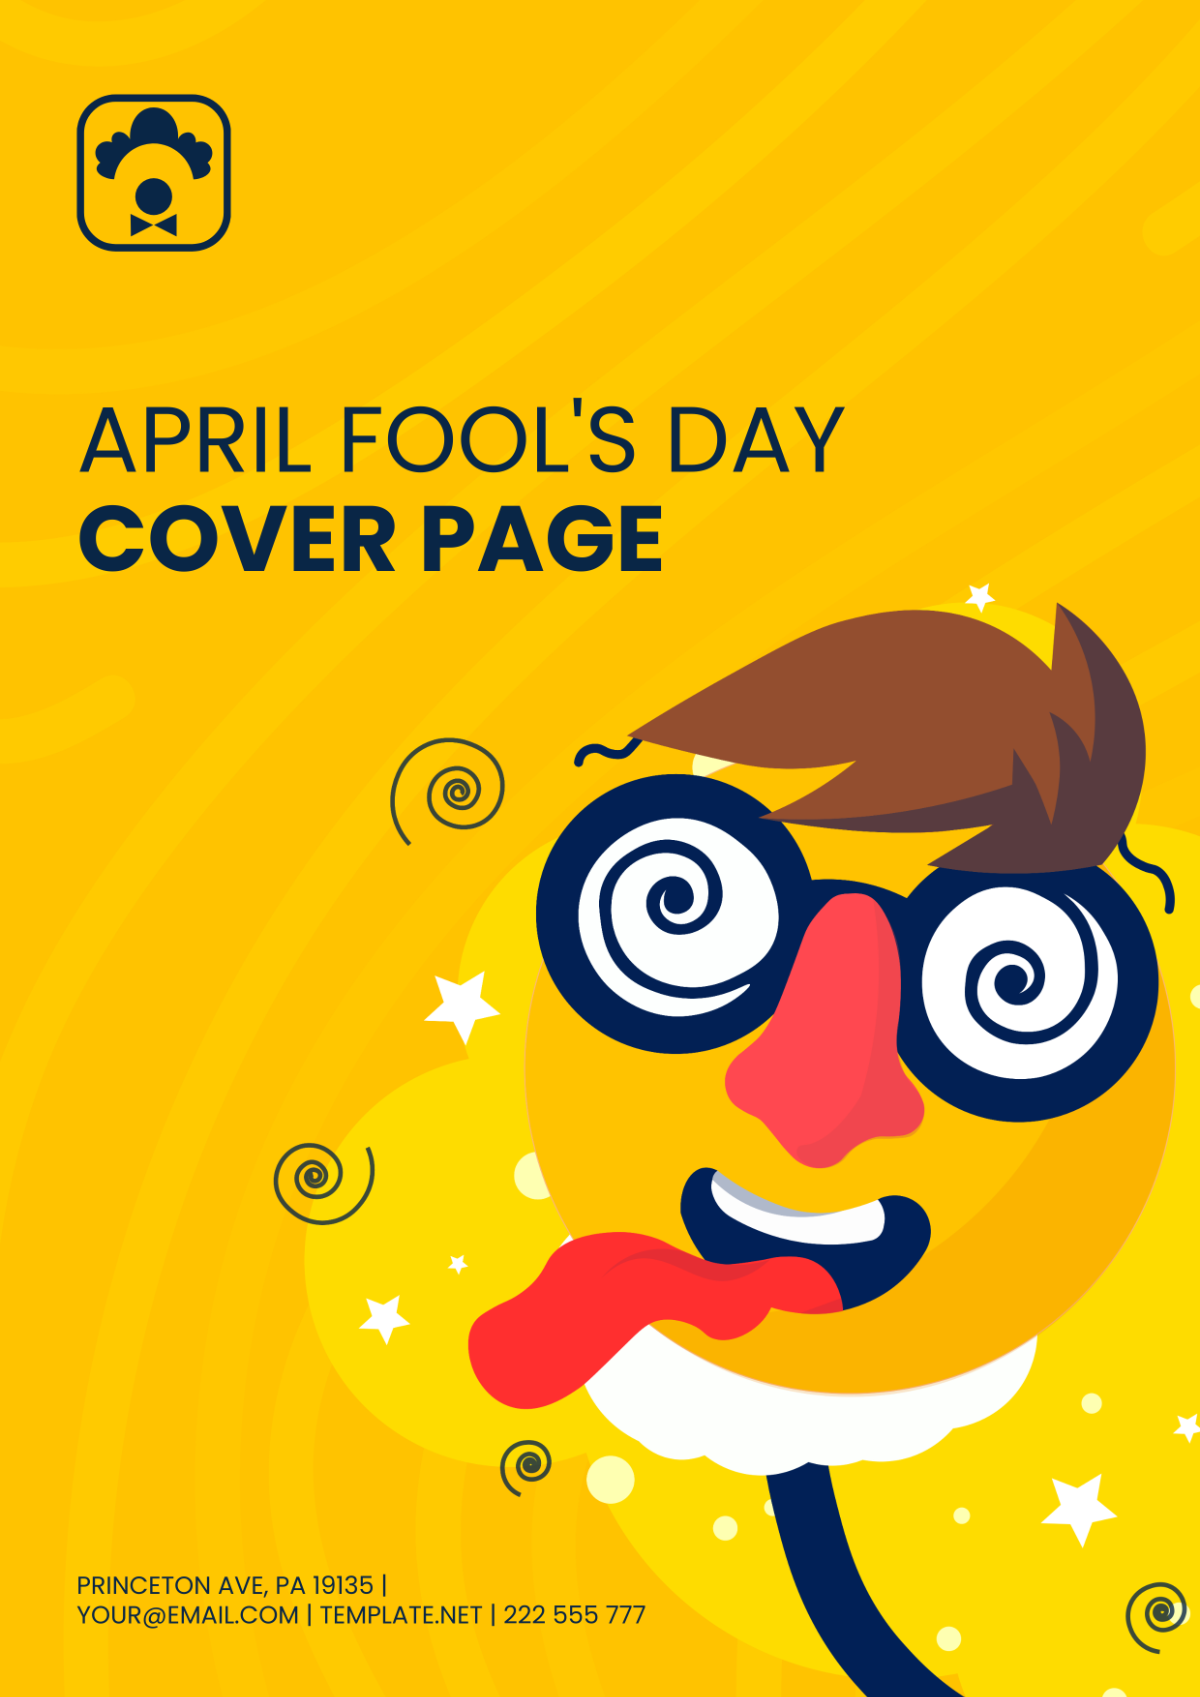 April Fool's Day Cover Page